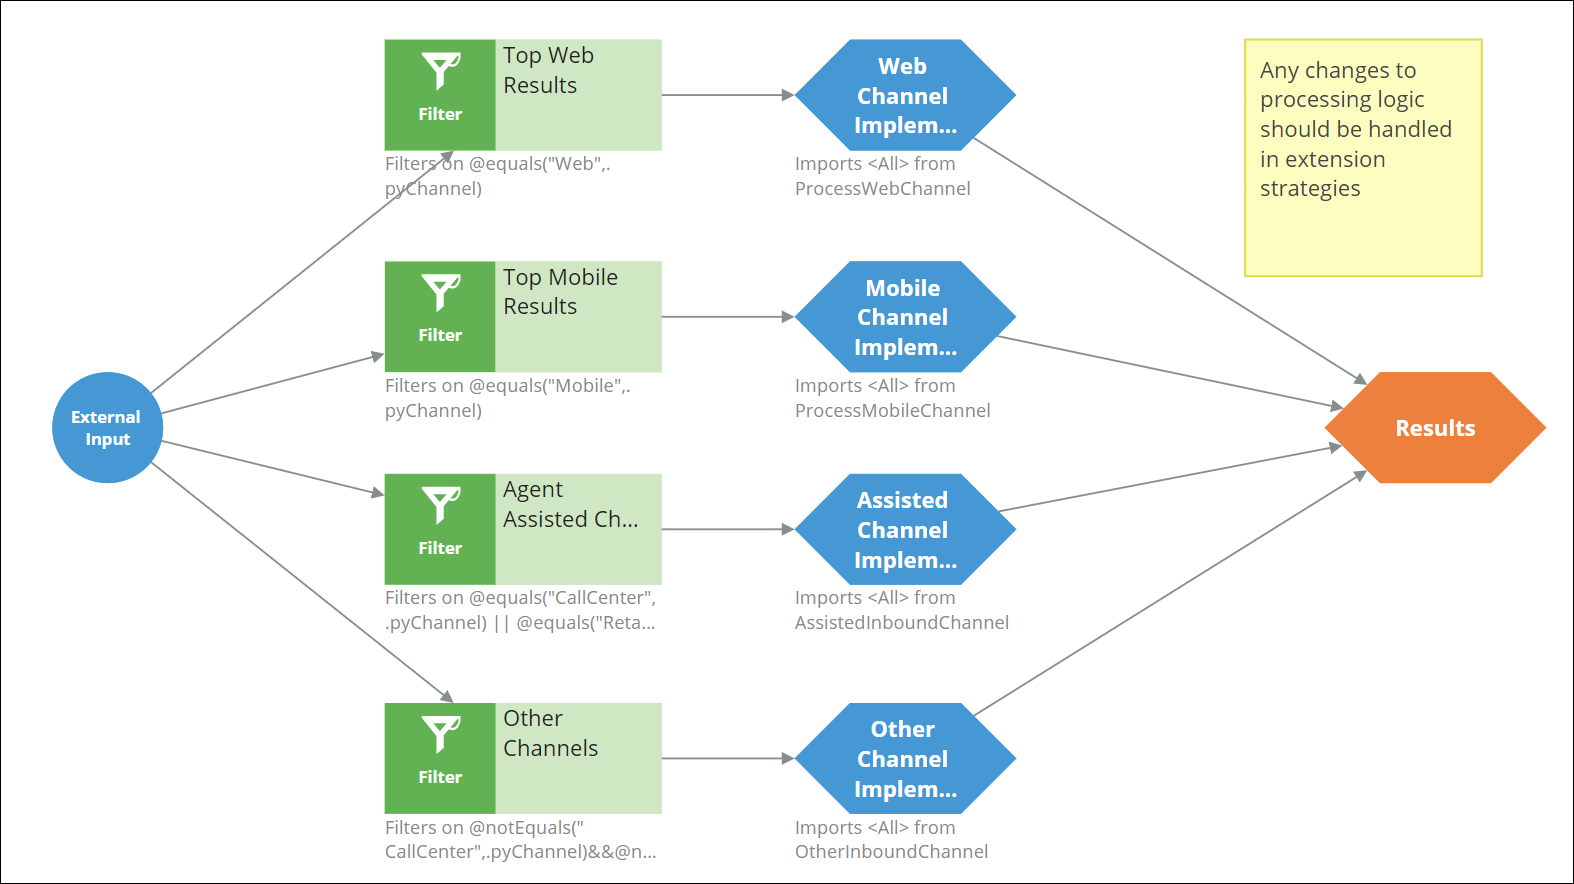 The InboundChannelProcessing strategy